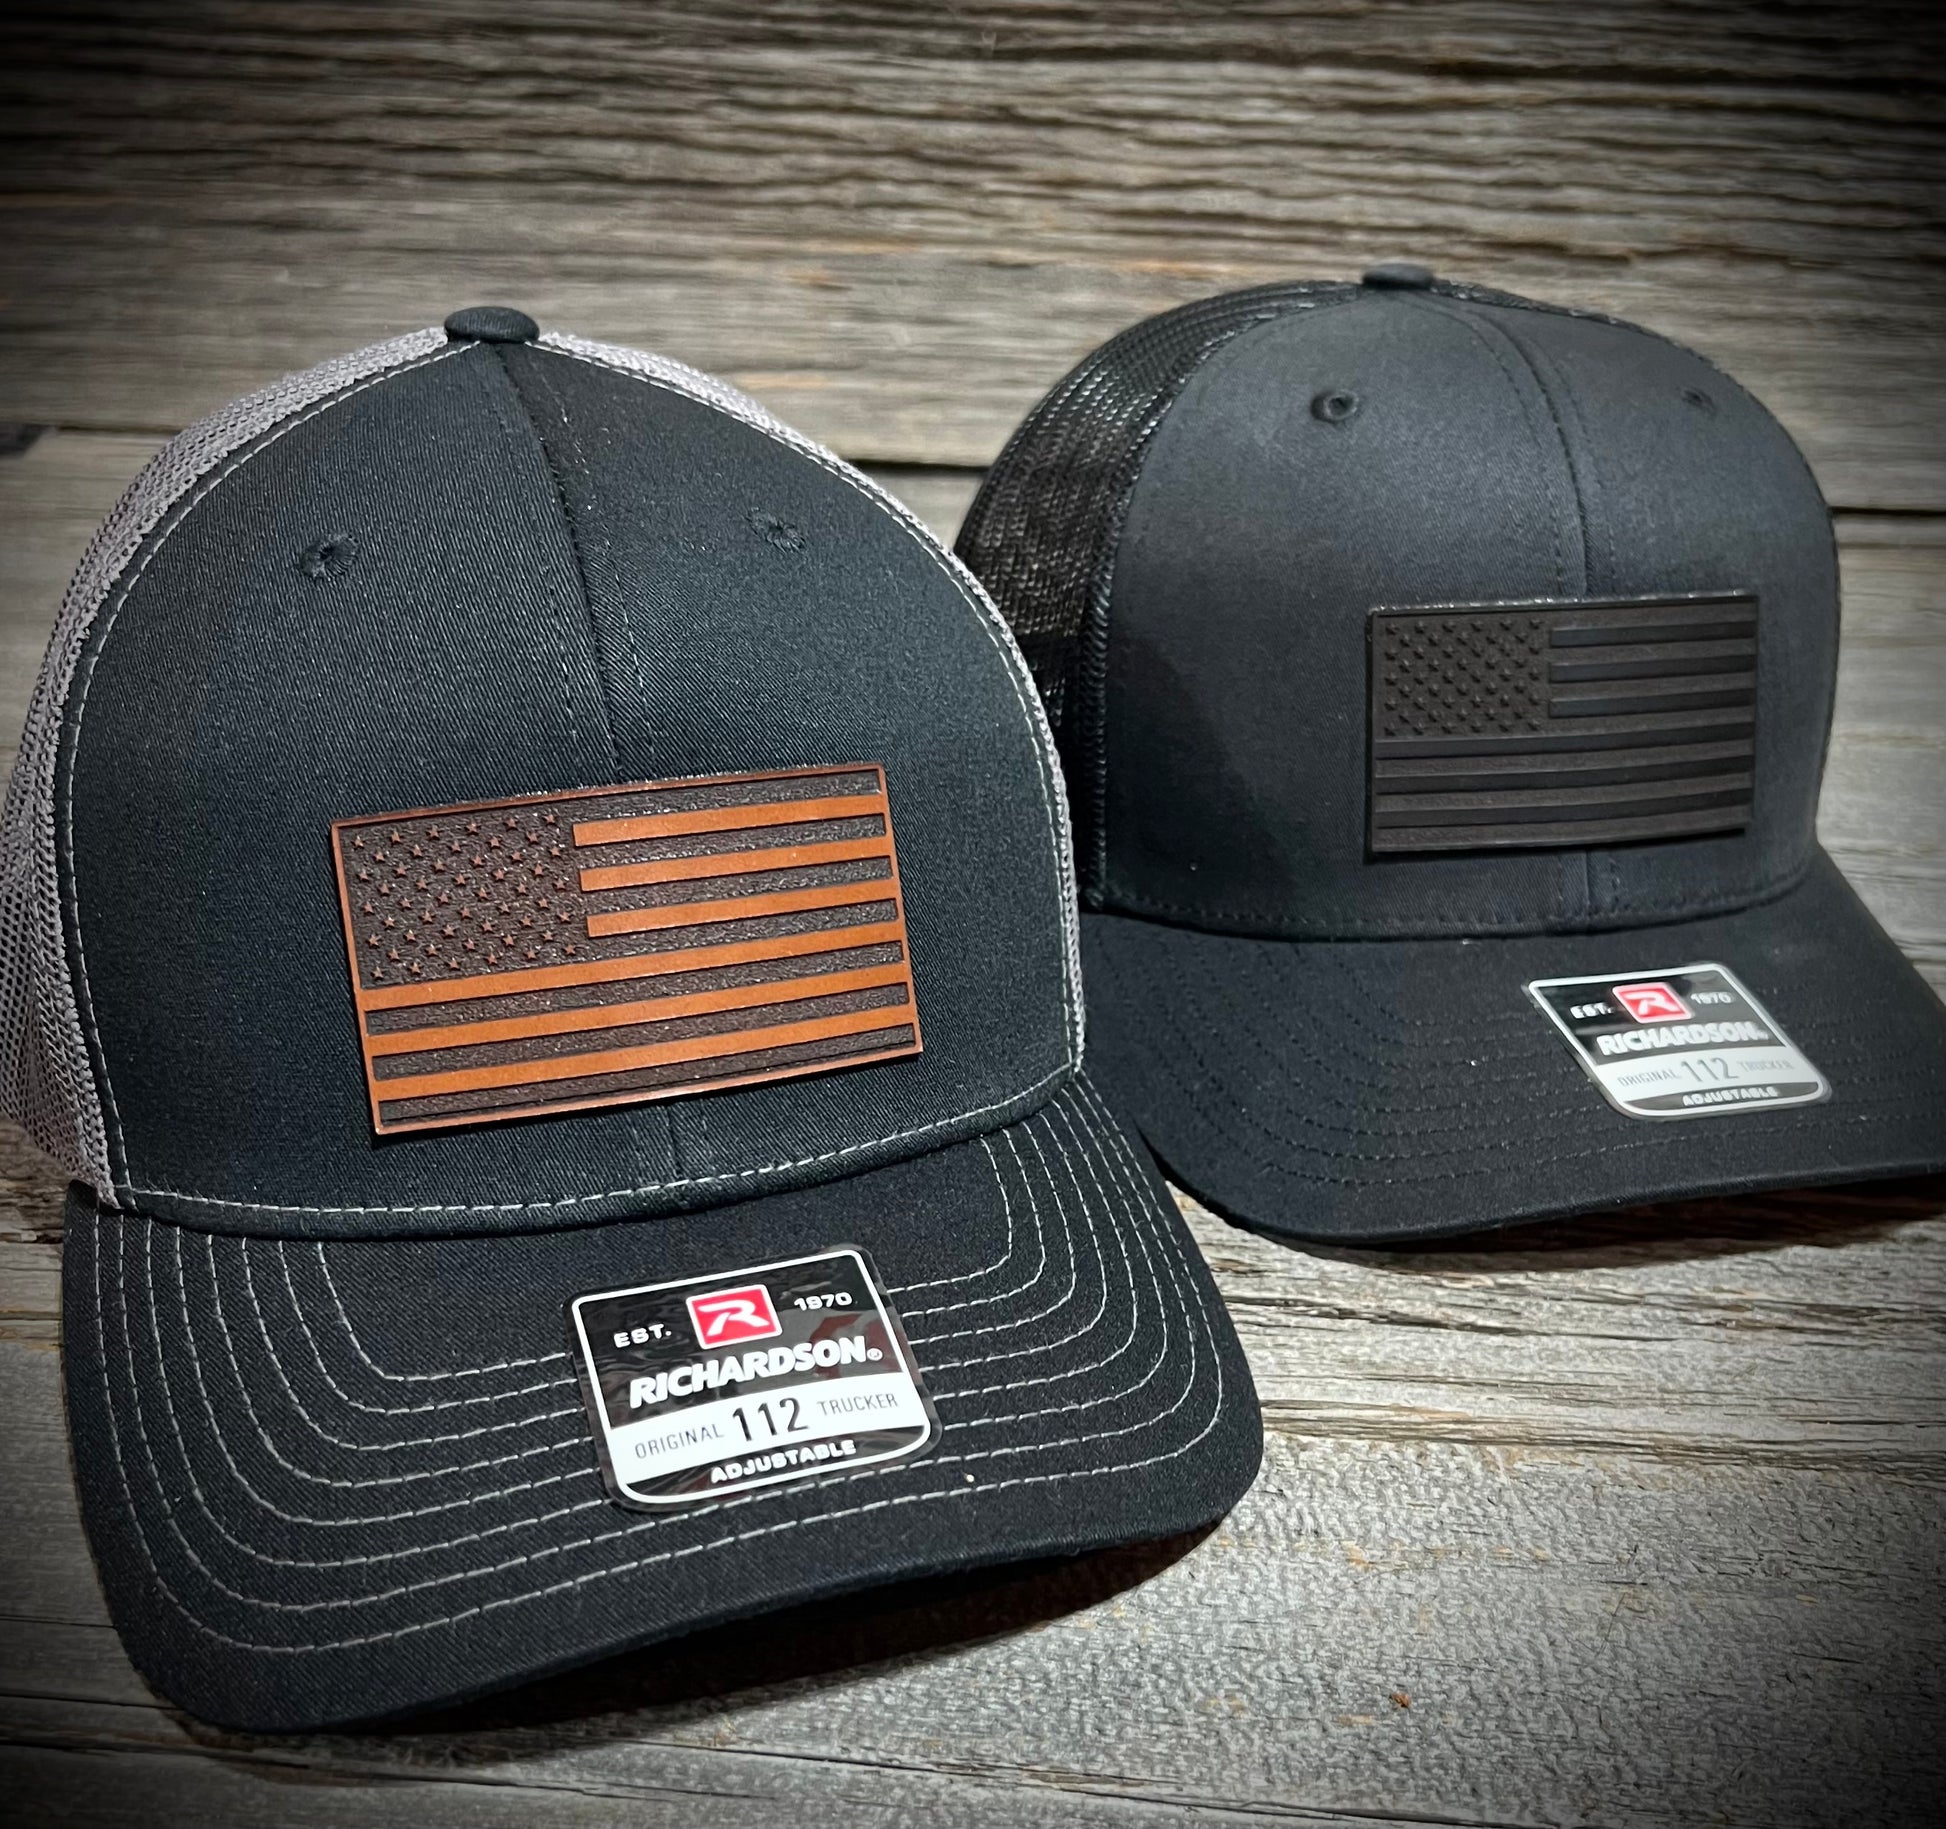 America - Land of the Free Because of the Brave Leather Patch Hat